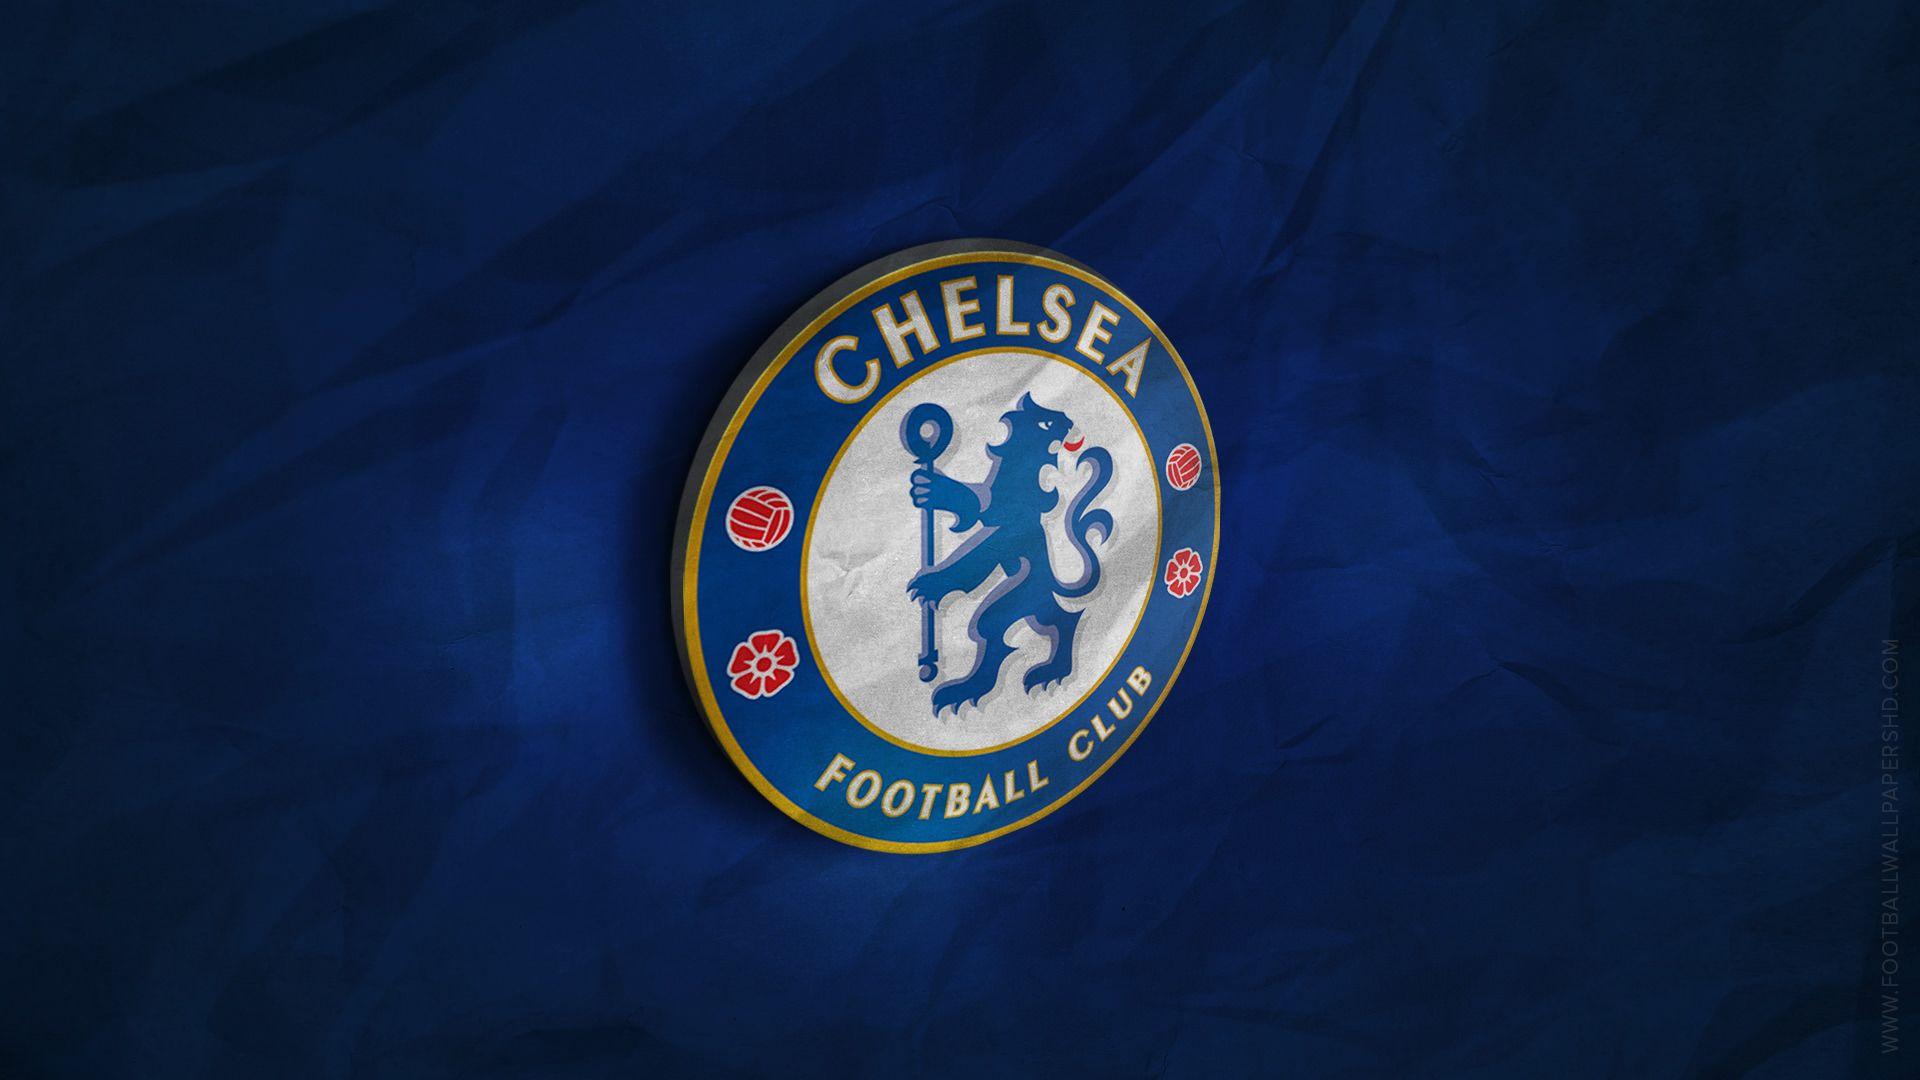 Chelsea Logo Wallpapers With Fire Wallpaper Cave